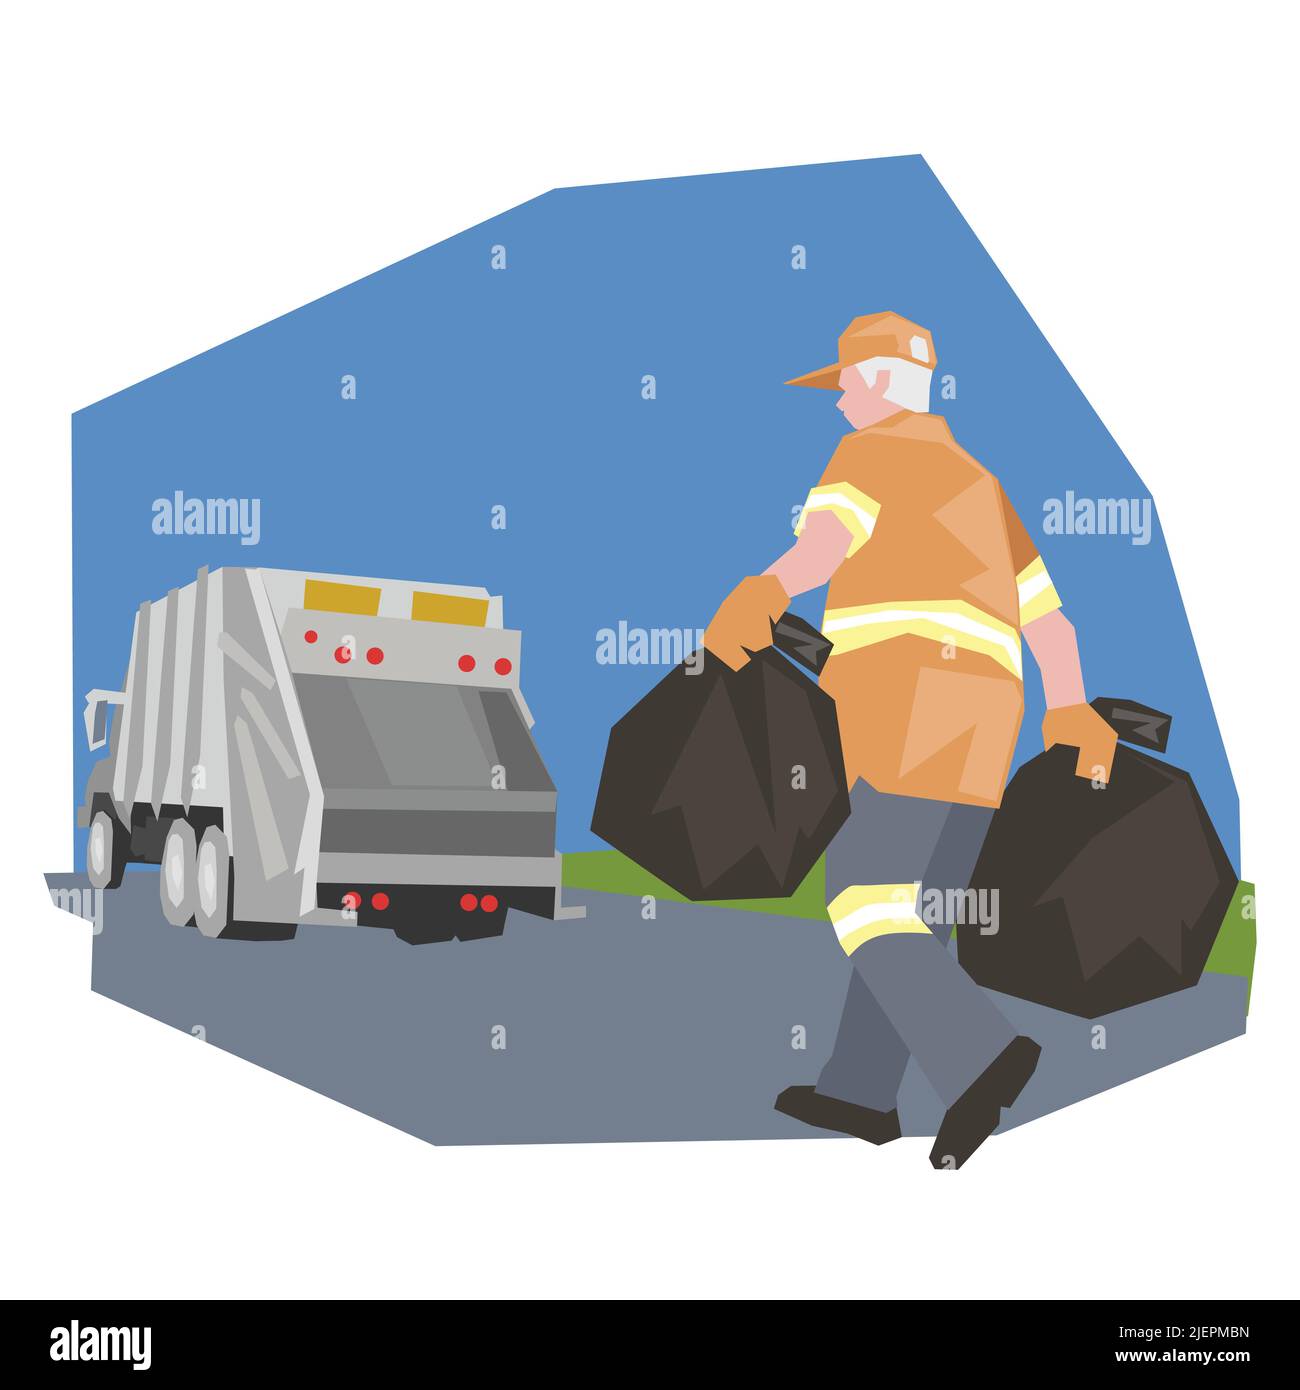 recycling waste and garbage services clip art Stock Vector